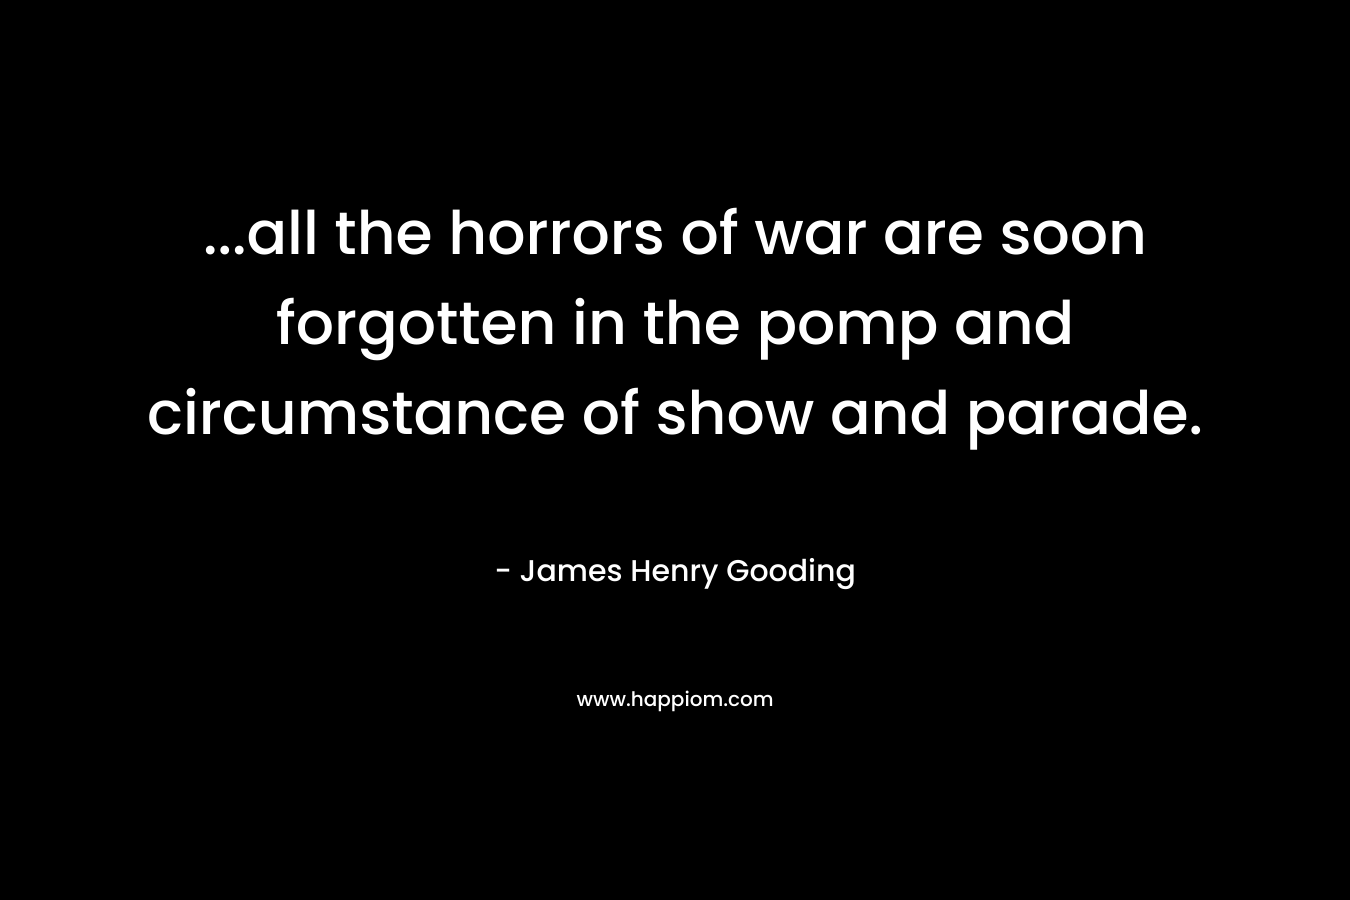 ...all the horrors of war are soon forgotten in the pomp and circumstance of show and parade.